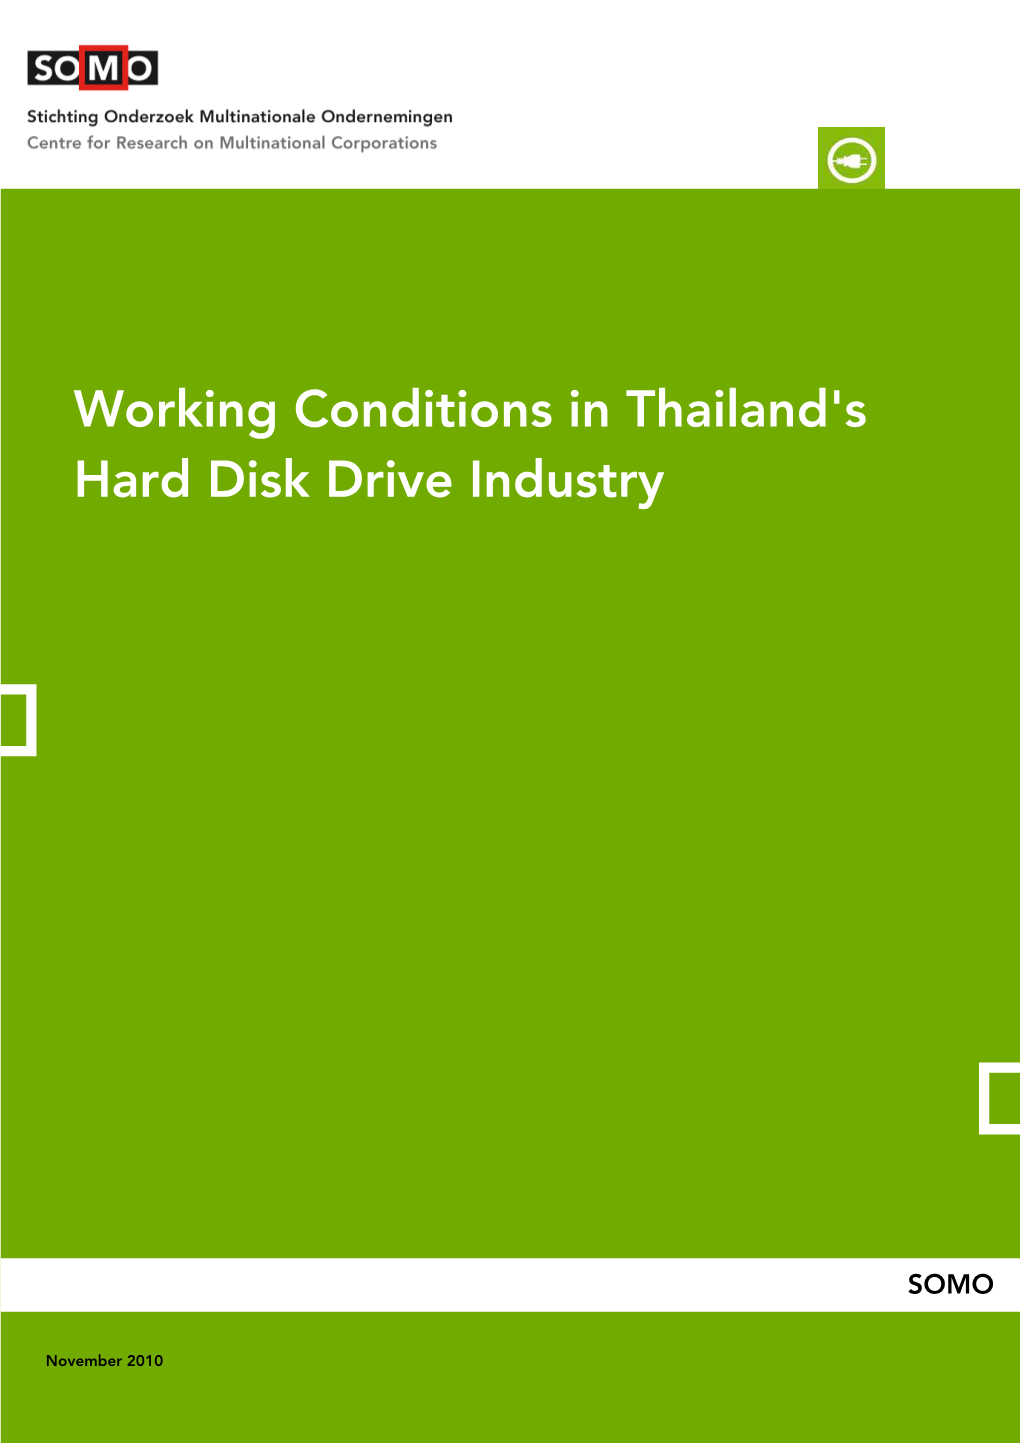 Working Conditions Thai HDD Industry